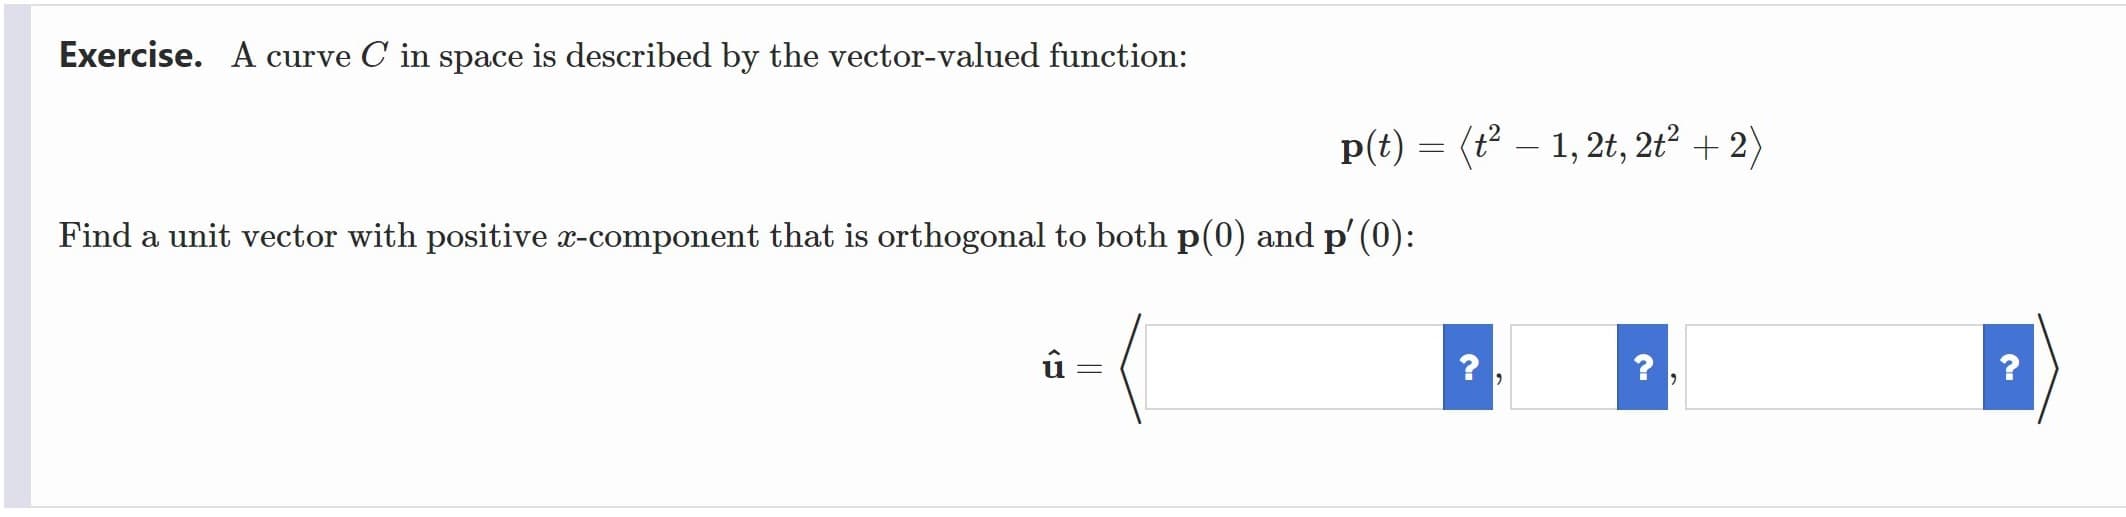 Exercise. A curve C in space is described by the vector-valued function:
p(t) = (t² – 1, 2t, 2t² + 2)
Find a unit vector with positive x-component that is orthogonal to both p(0) and p' (0):
